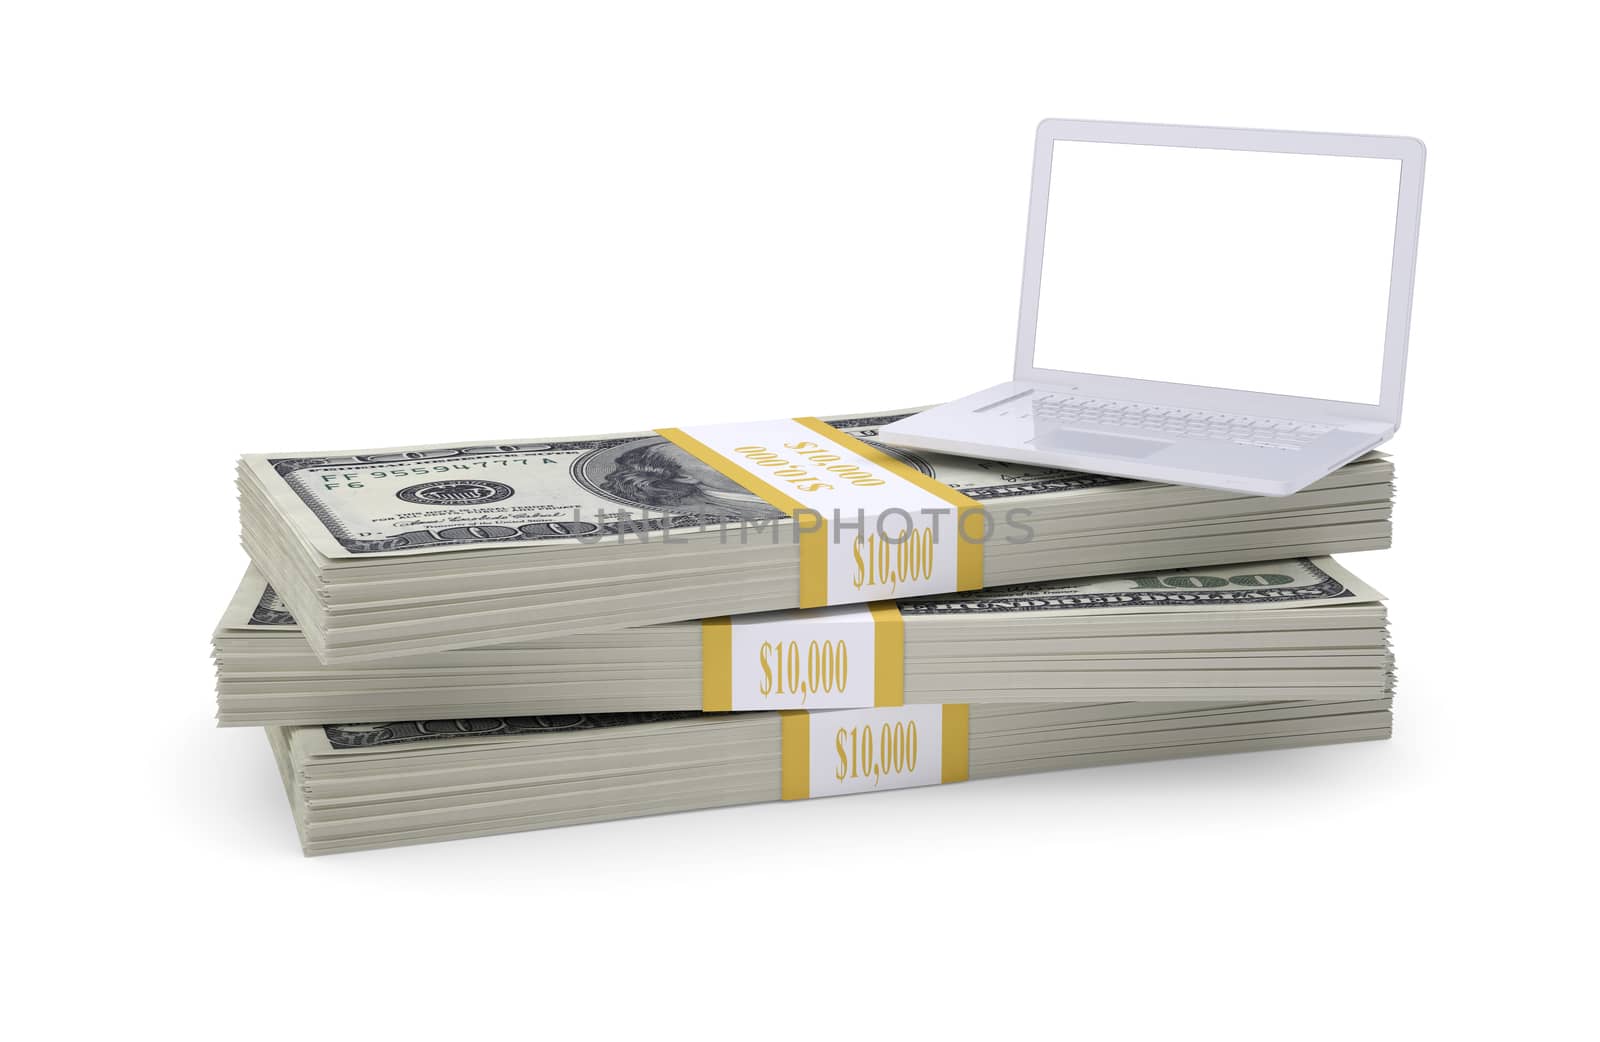 Laptop stand on pack of dollars. White background